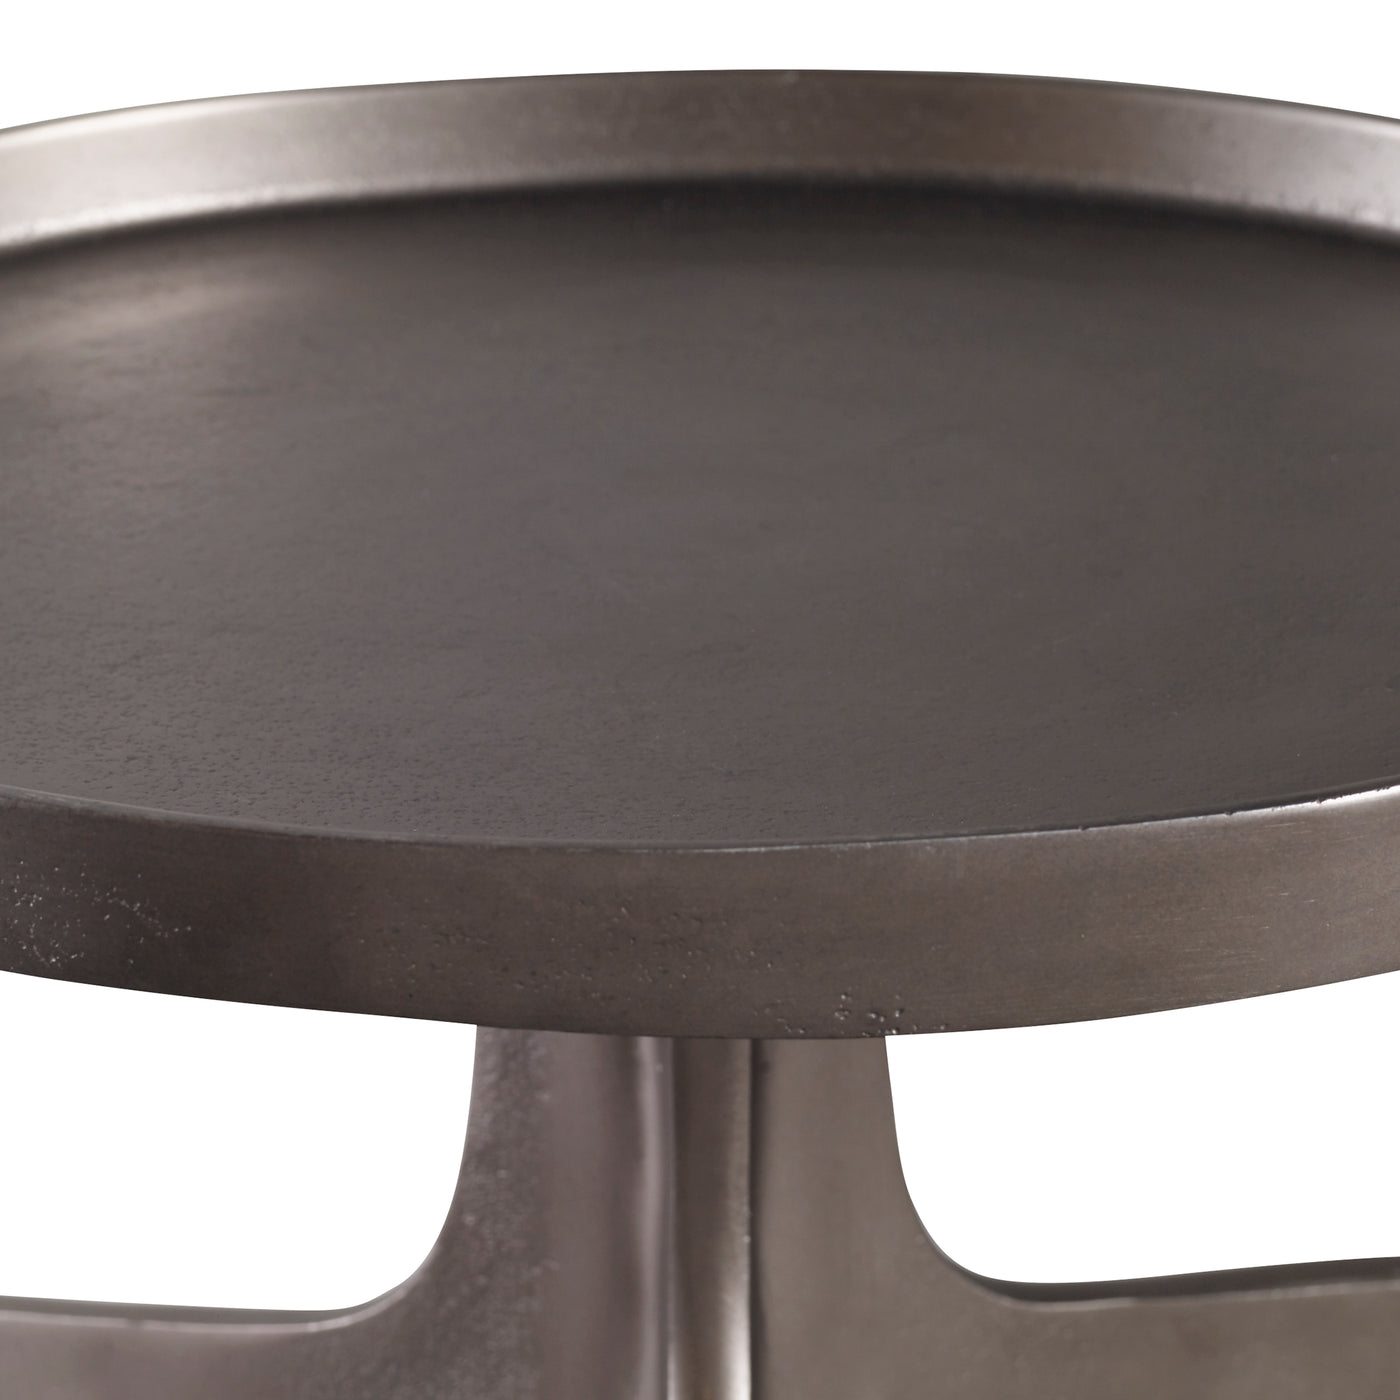 Providing An Organic Global Feel, This Cast Aluminum Accent Table Features A Shapely Curved Base And Round Top, Finished I...